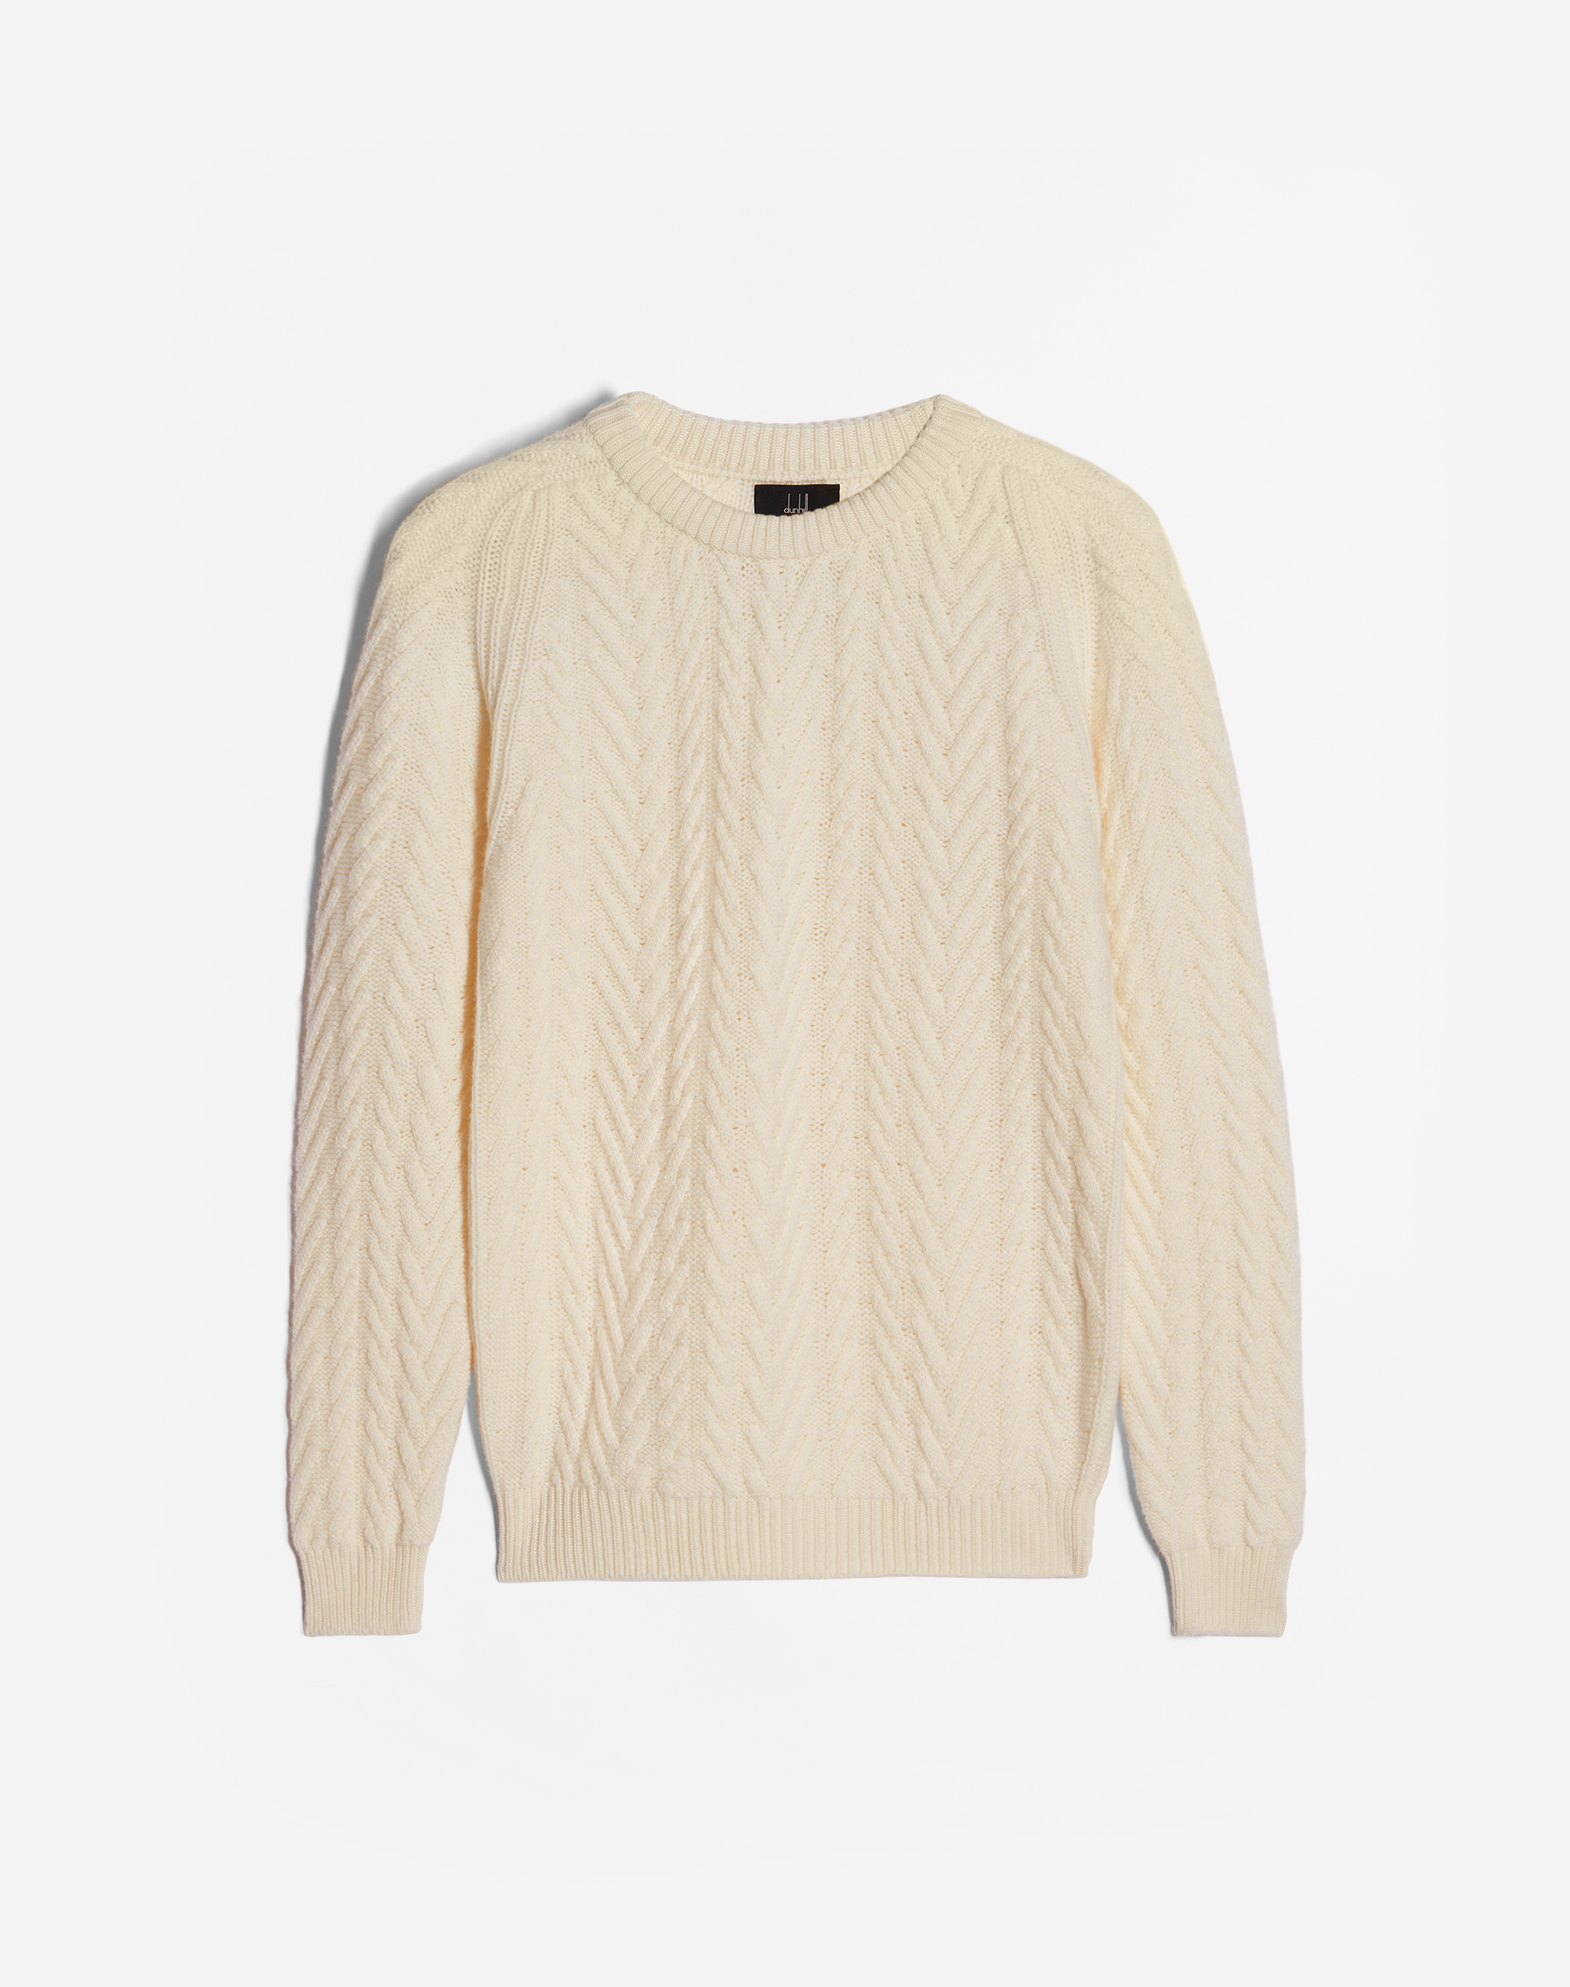 Dunhill Luxury Men's Jumpers